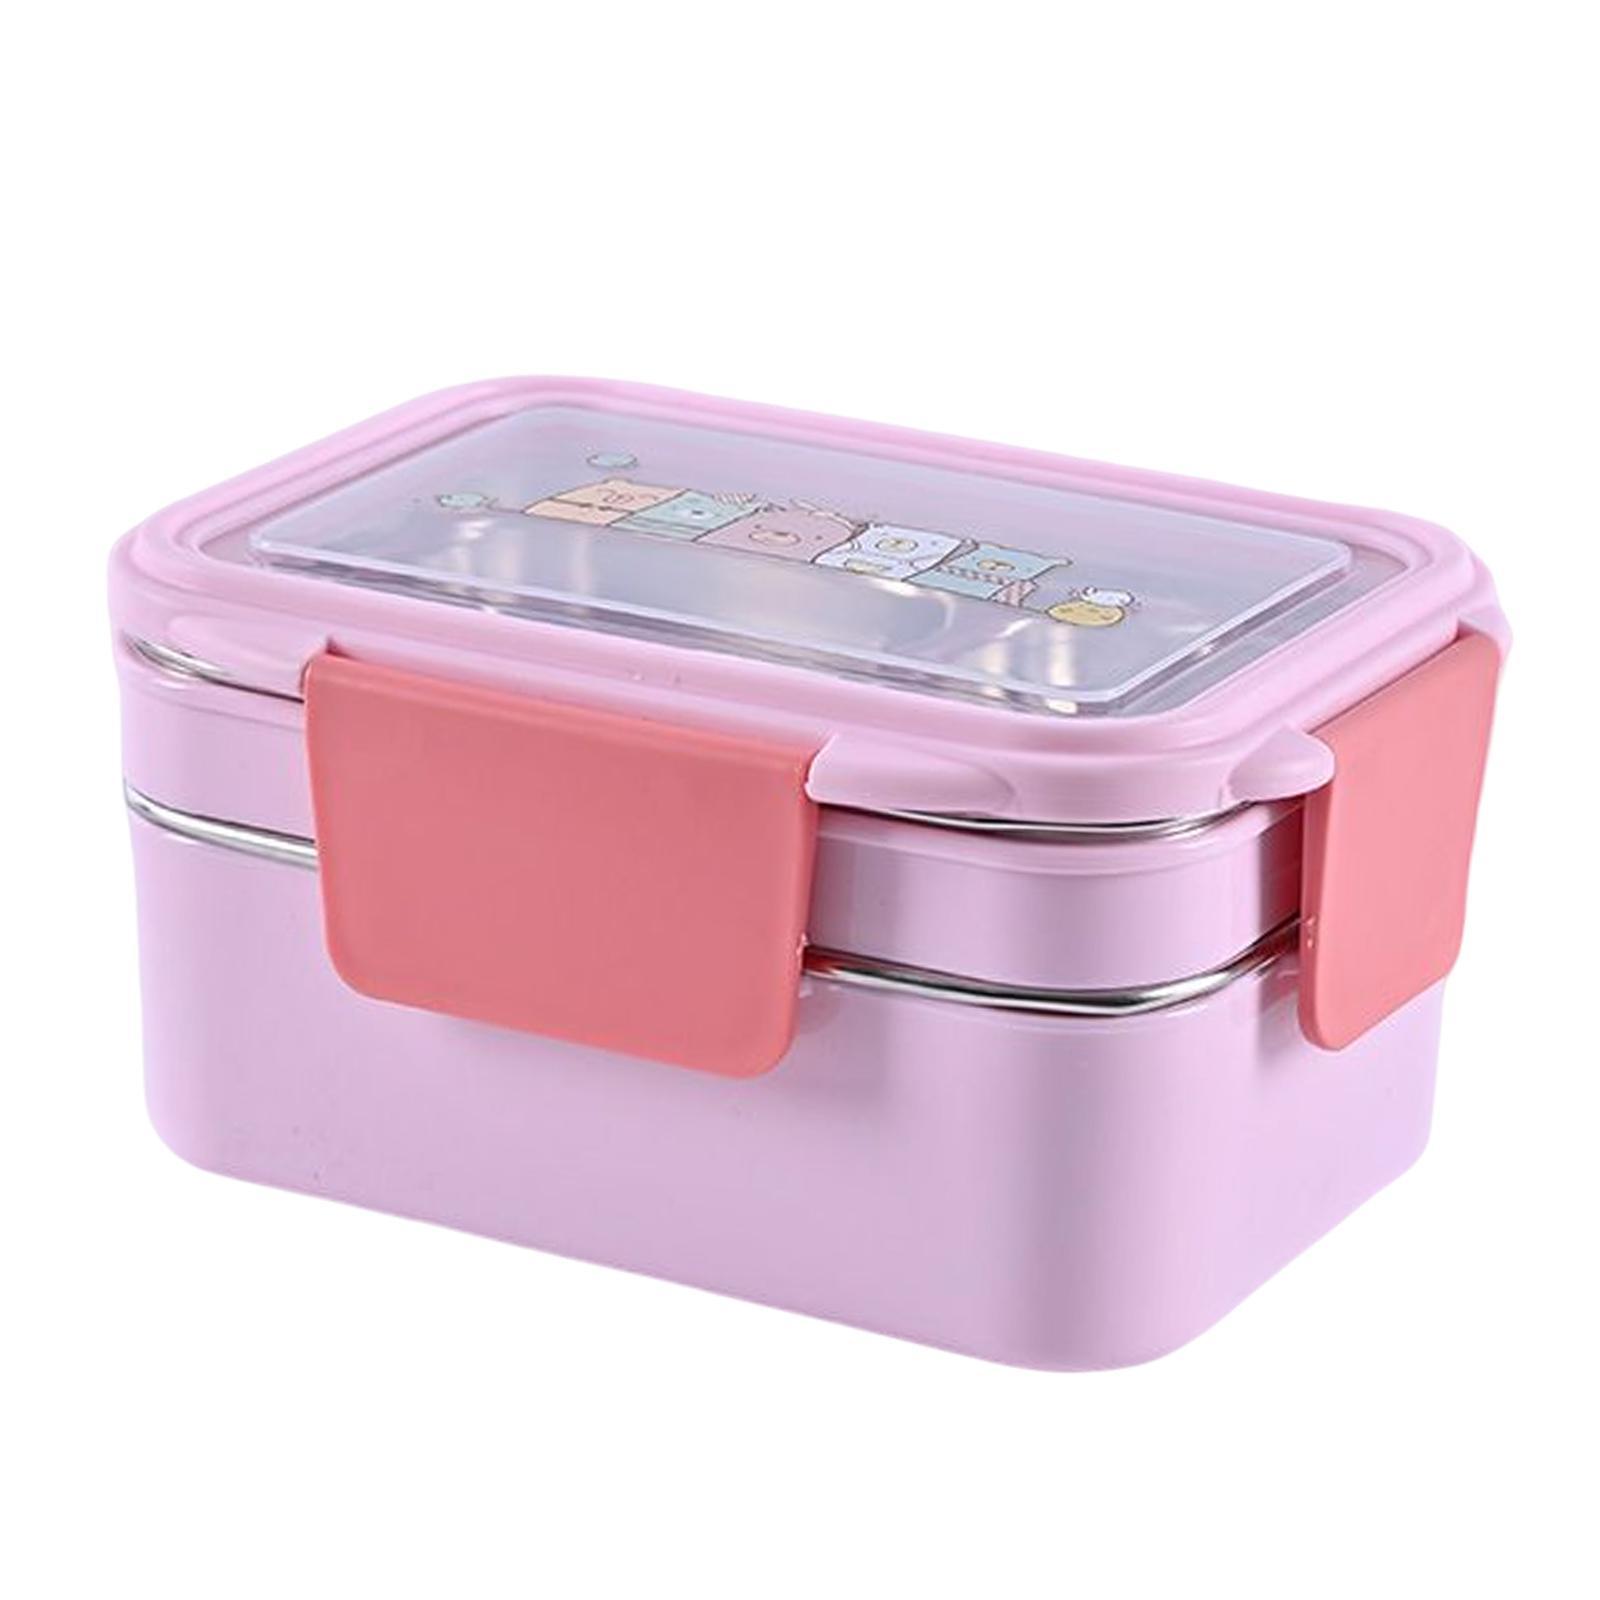 2 Layer Stainless Steel Bento Box Food Container for Outdoor Camping Hiking